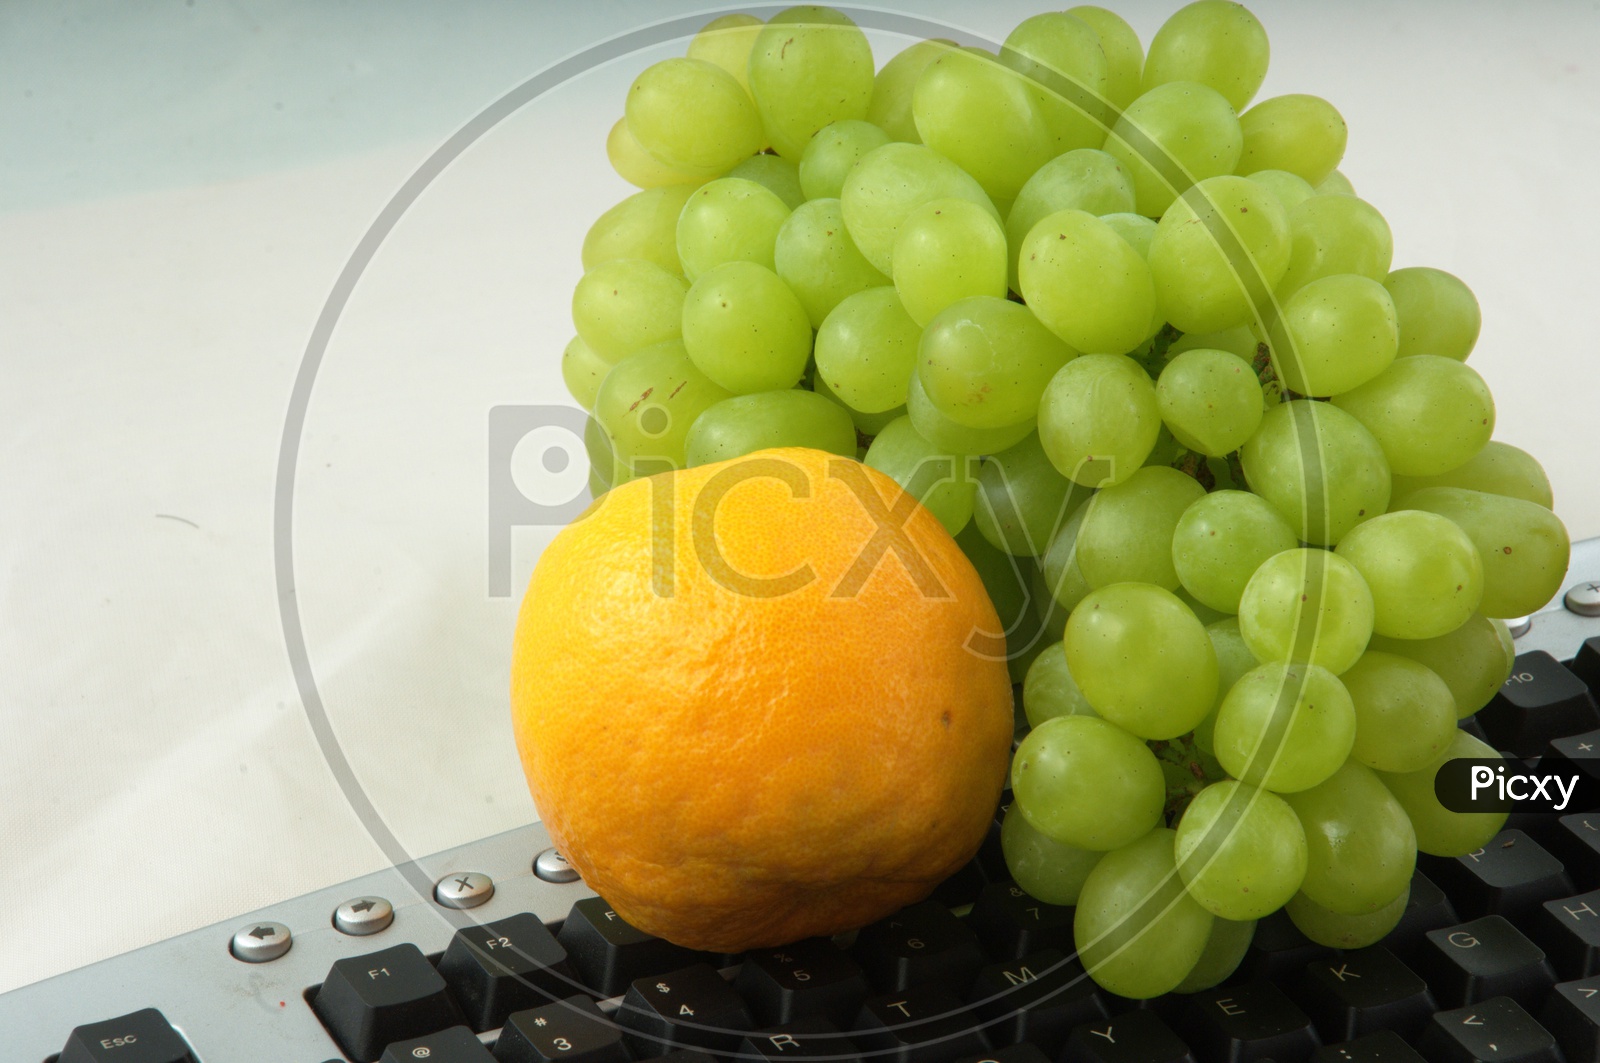 Photographs of oranges and grapes on a computer keyboard